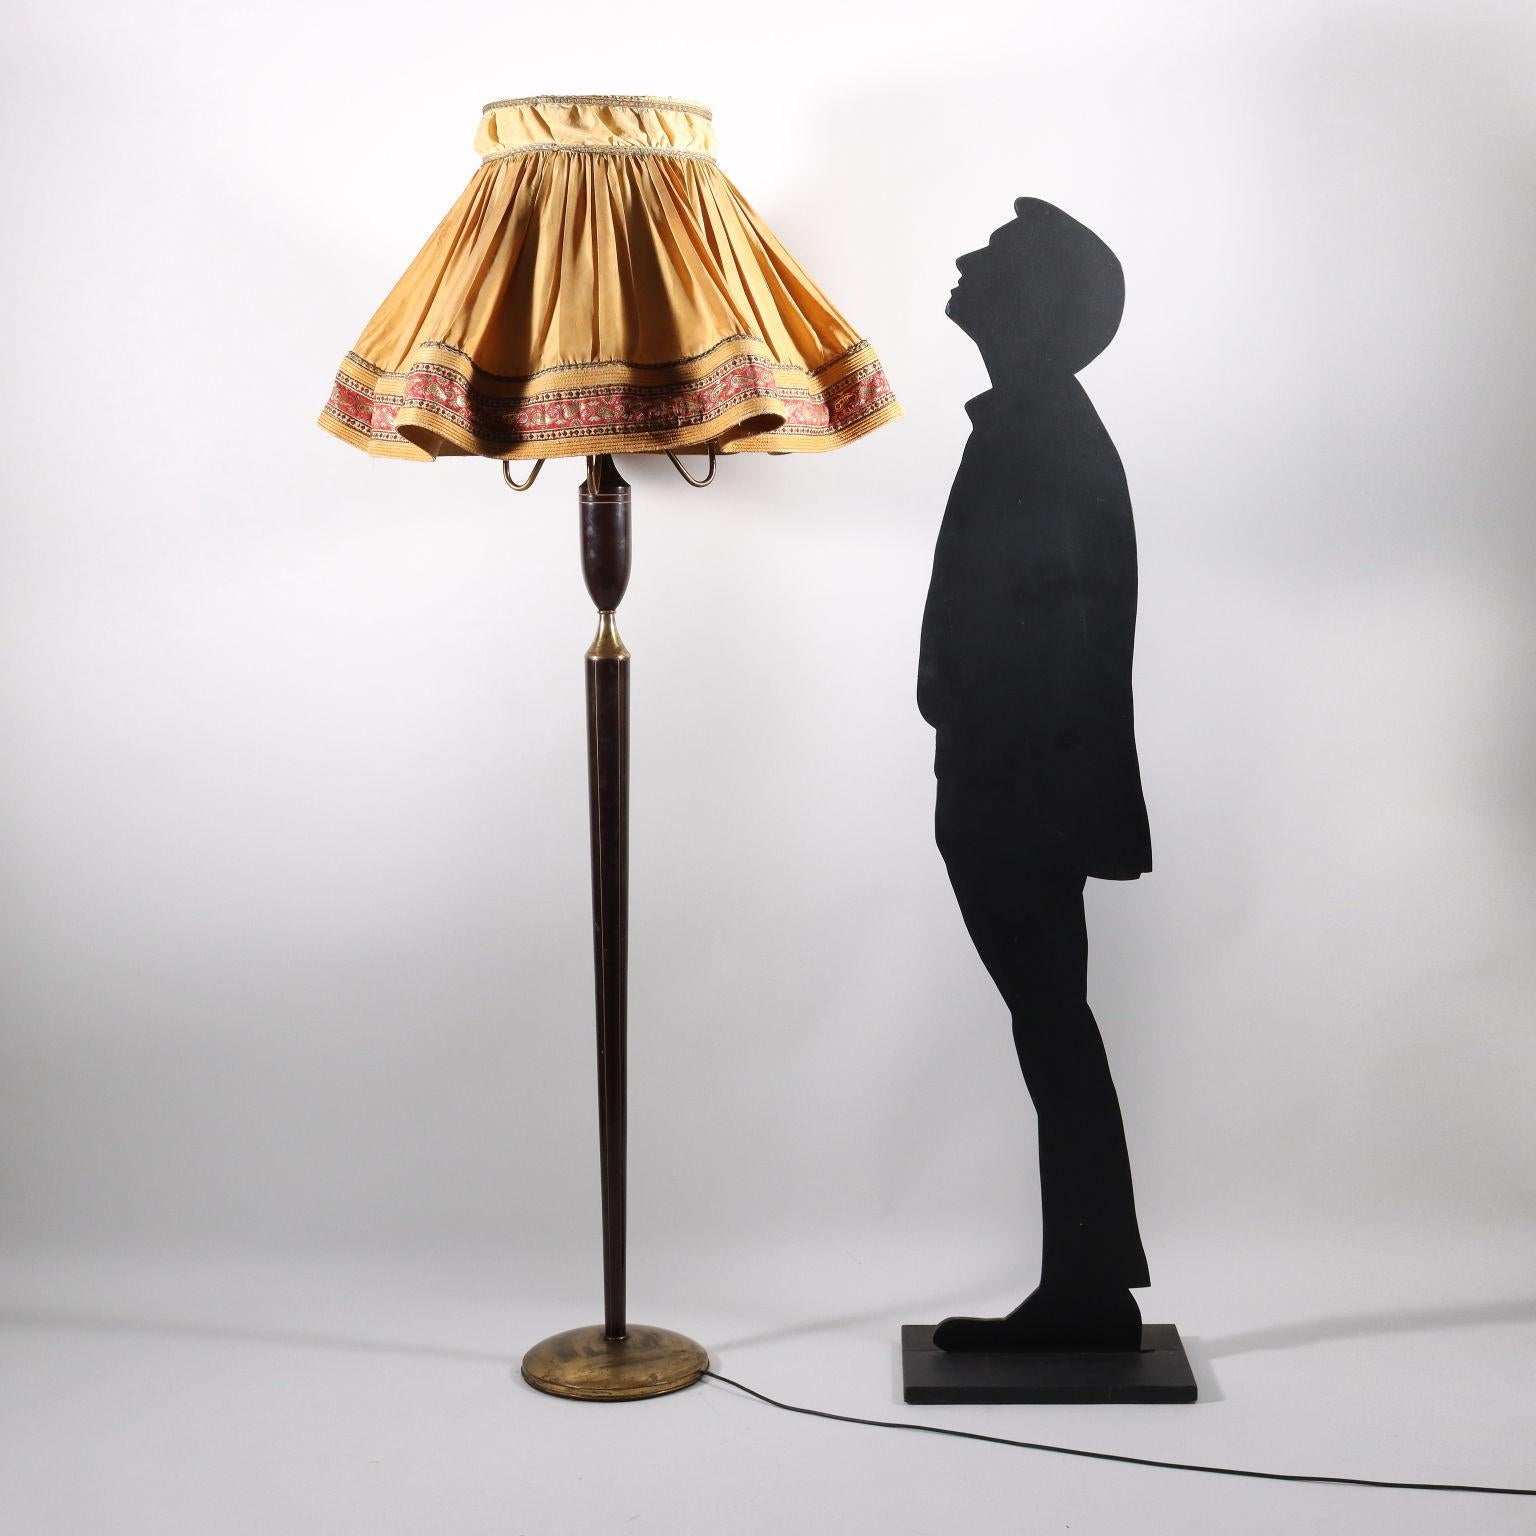 Floor lamp, brass, stained wood, fabric lampshade.